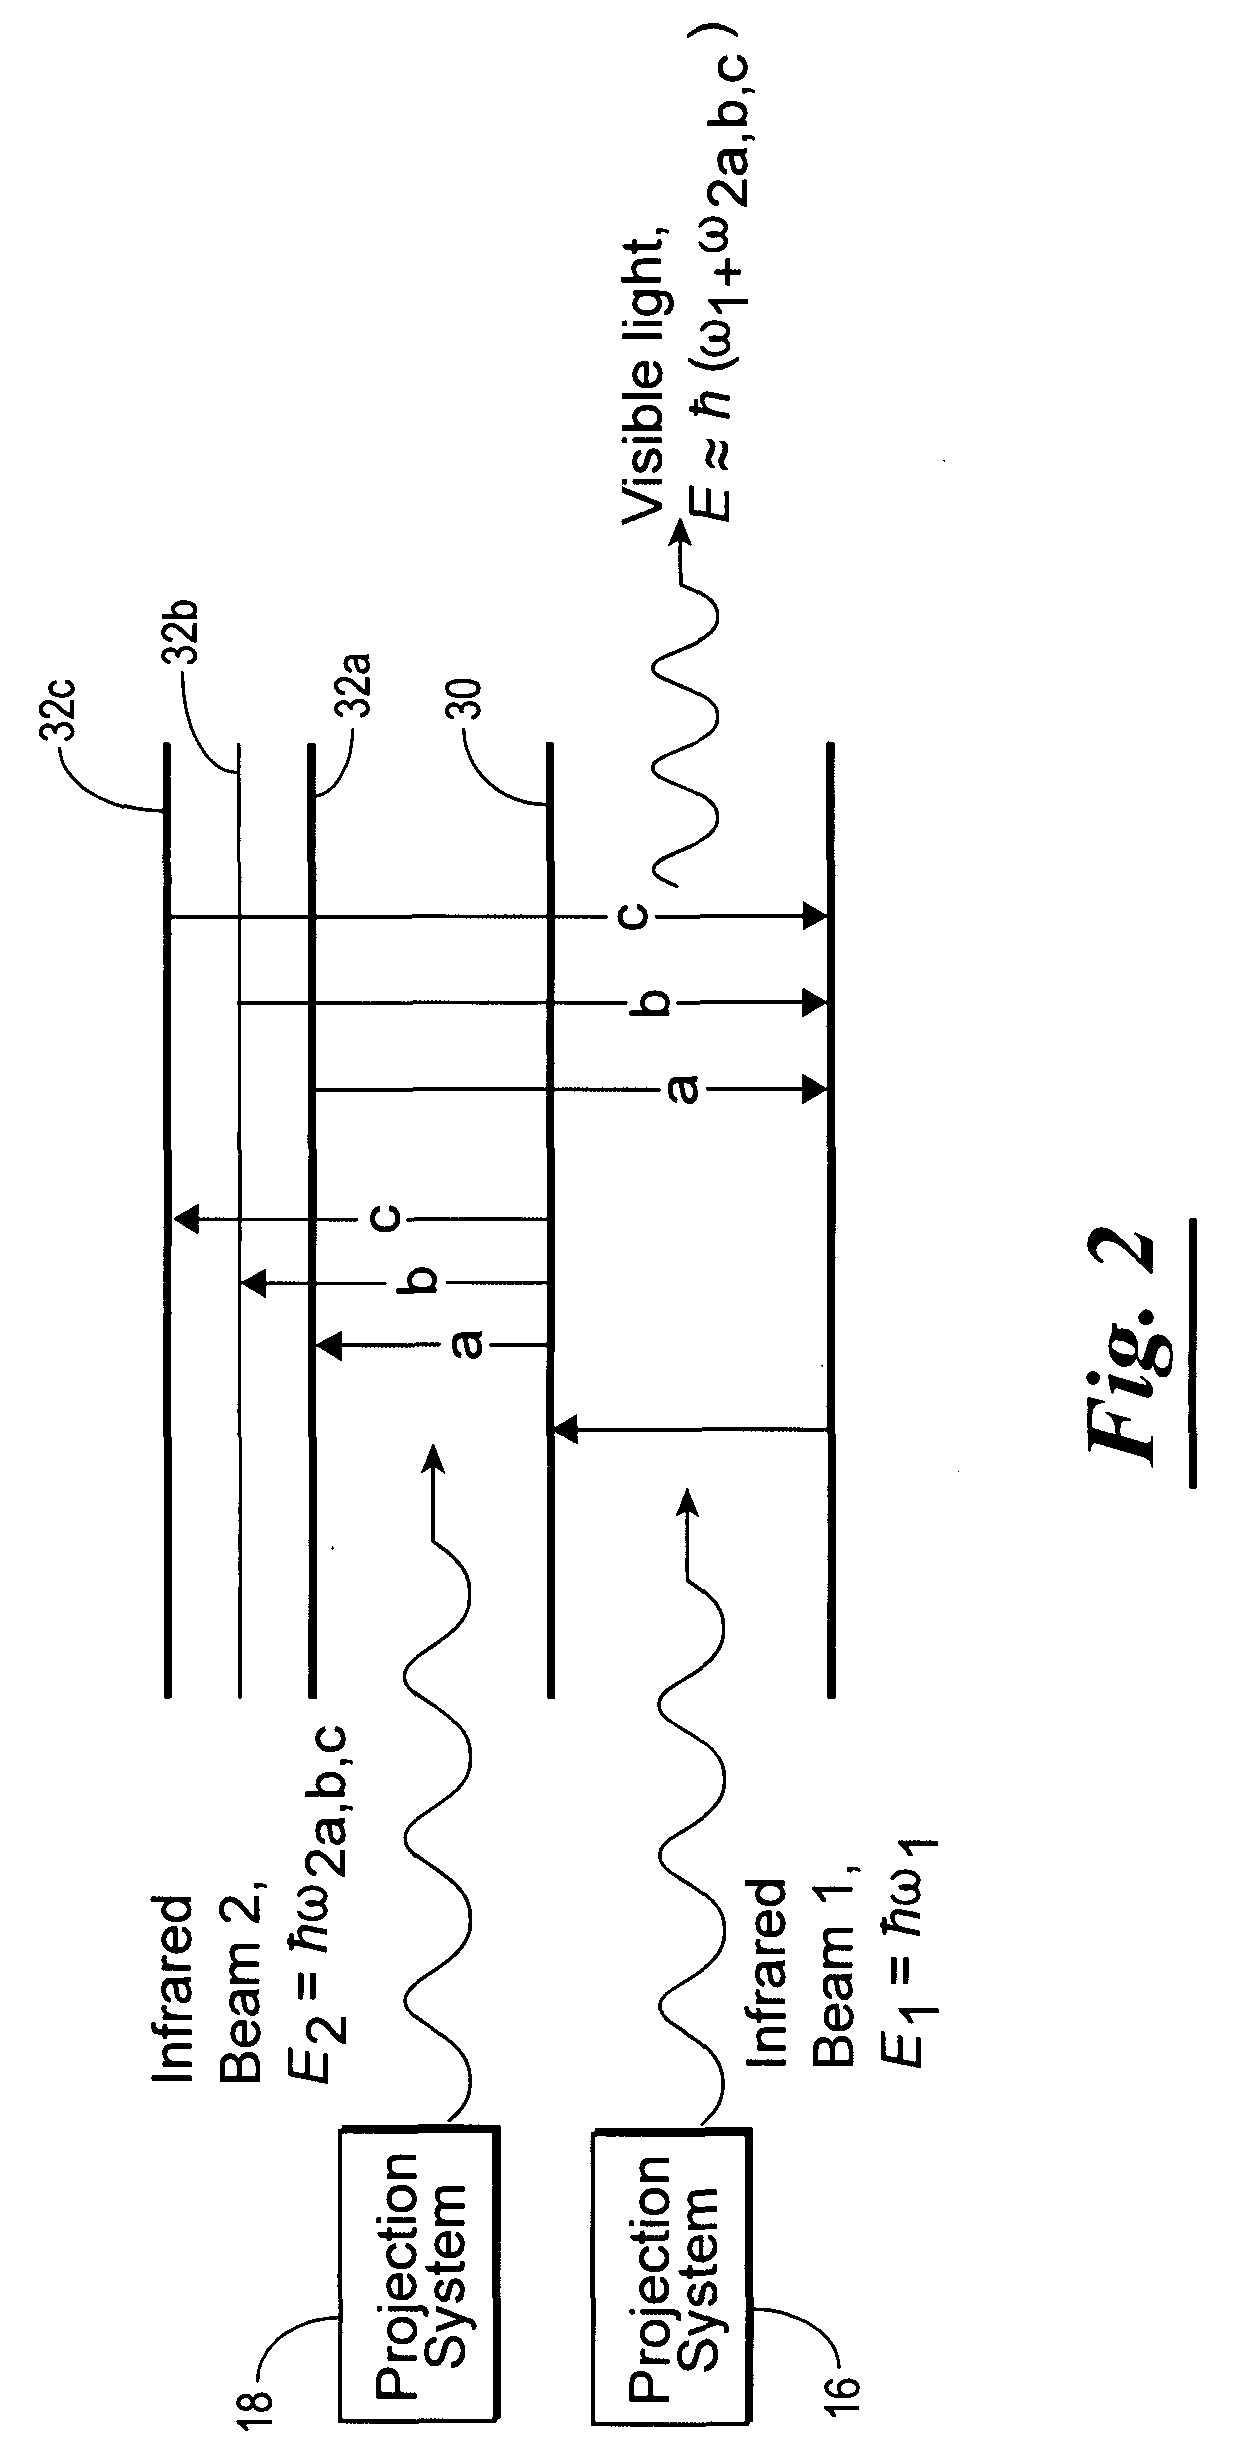 Light surface display for rendering a three-dimensional image